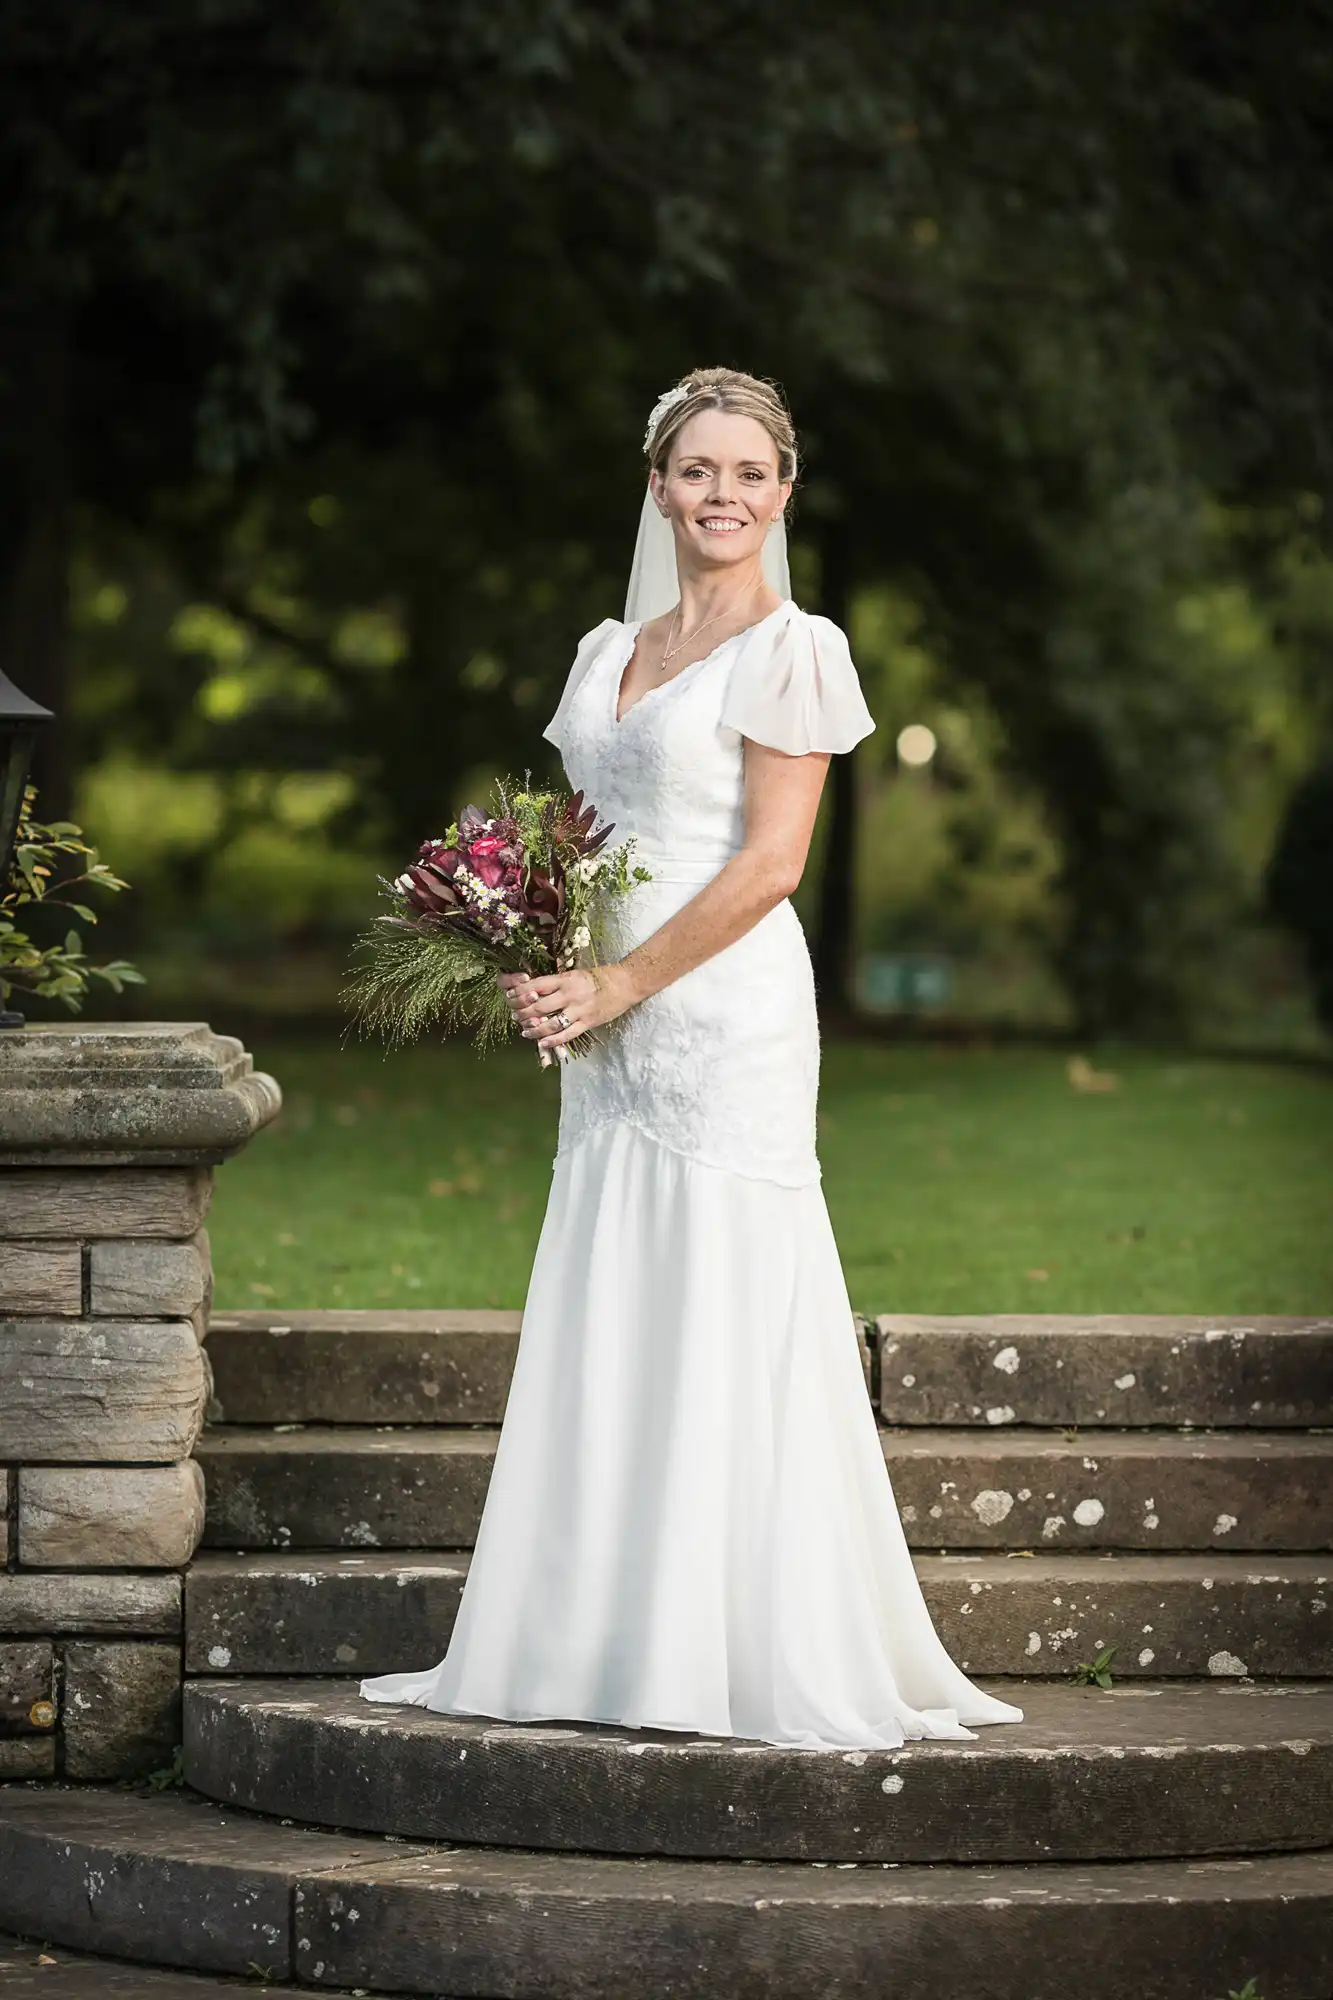 A bride in a white wedding dress holding a bouquet stands on stone steps in a park.